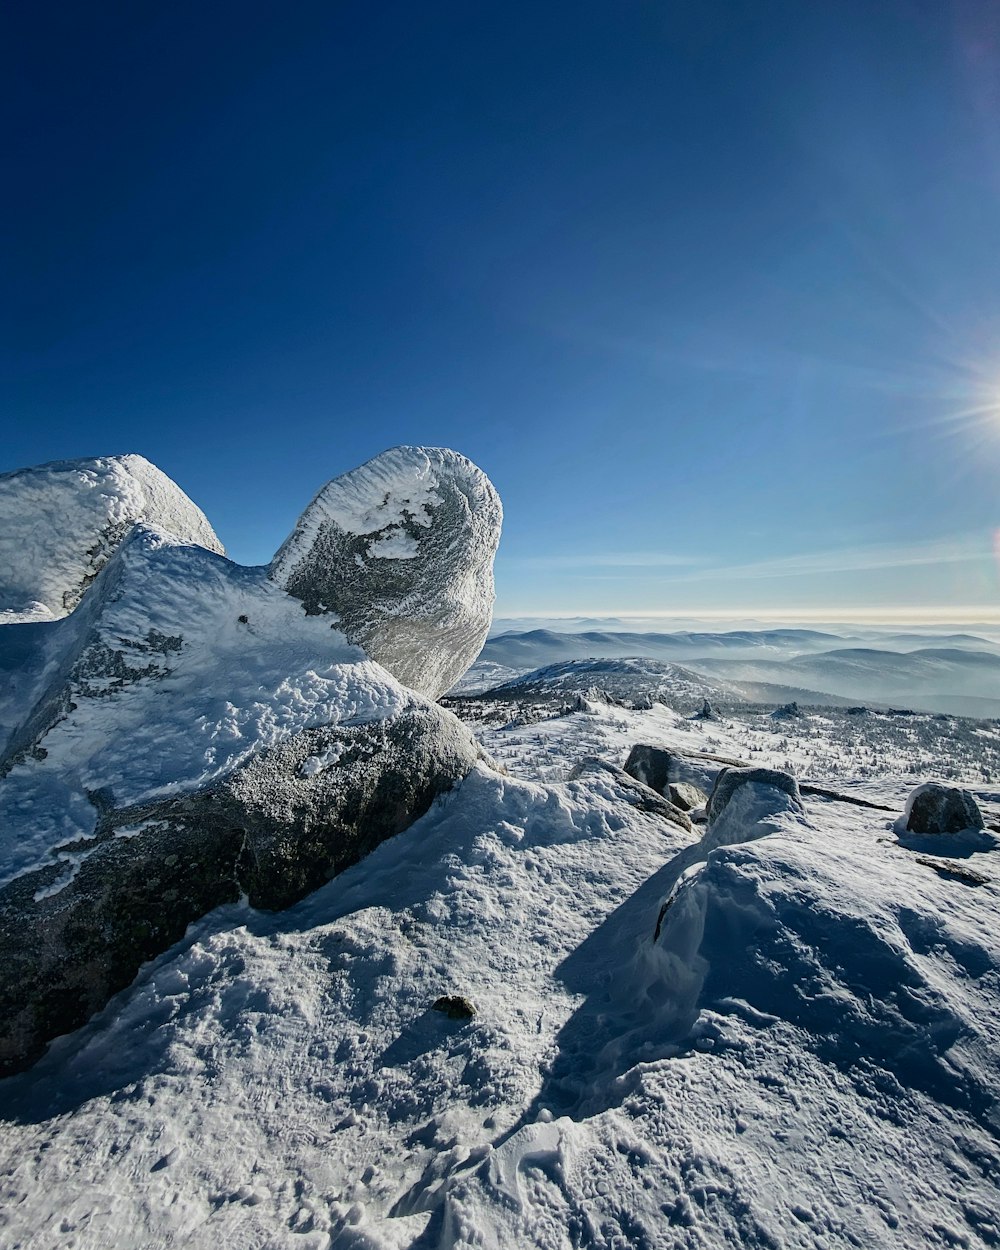 gray rock formation on snow covered ground under blue sky during daytime